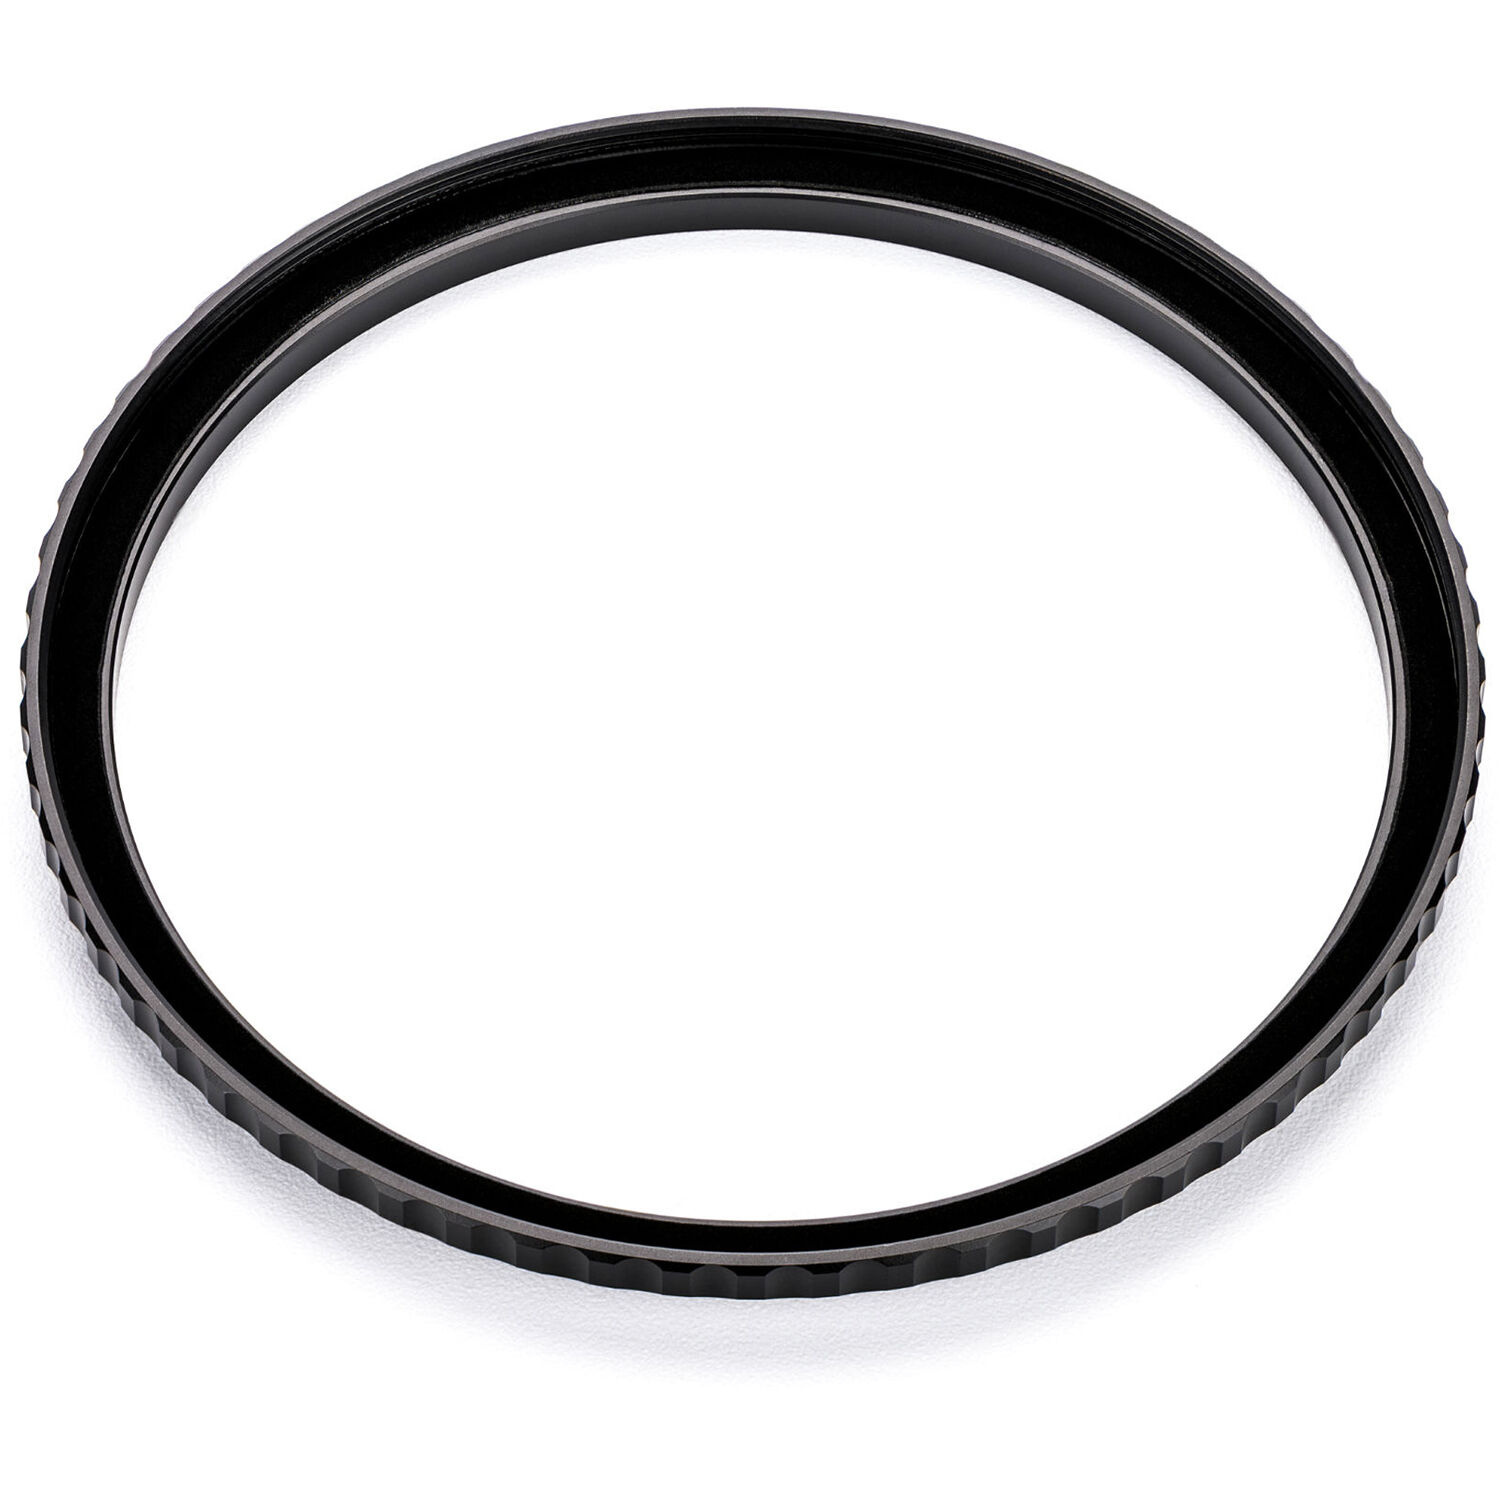 NiSi Brass Pro 67-72mm Step-Up Ring